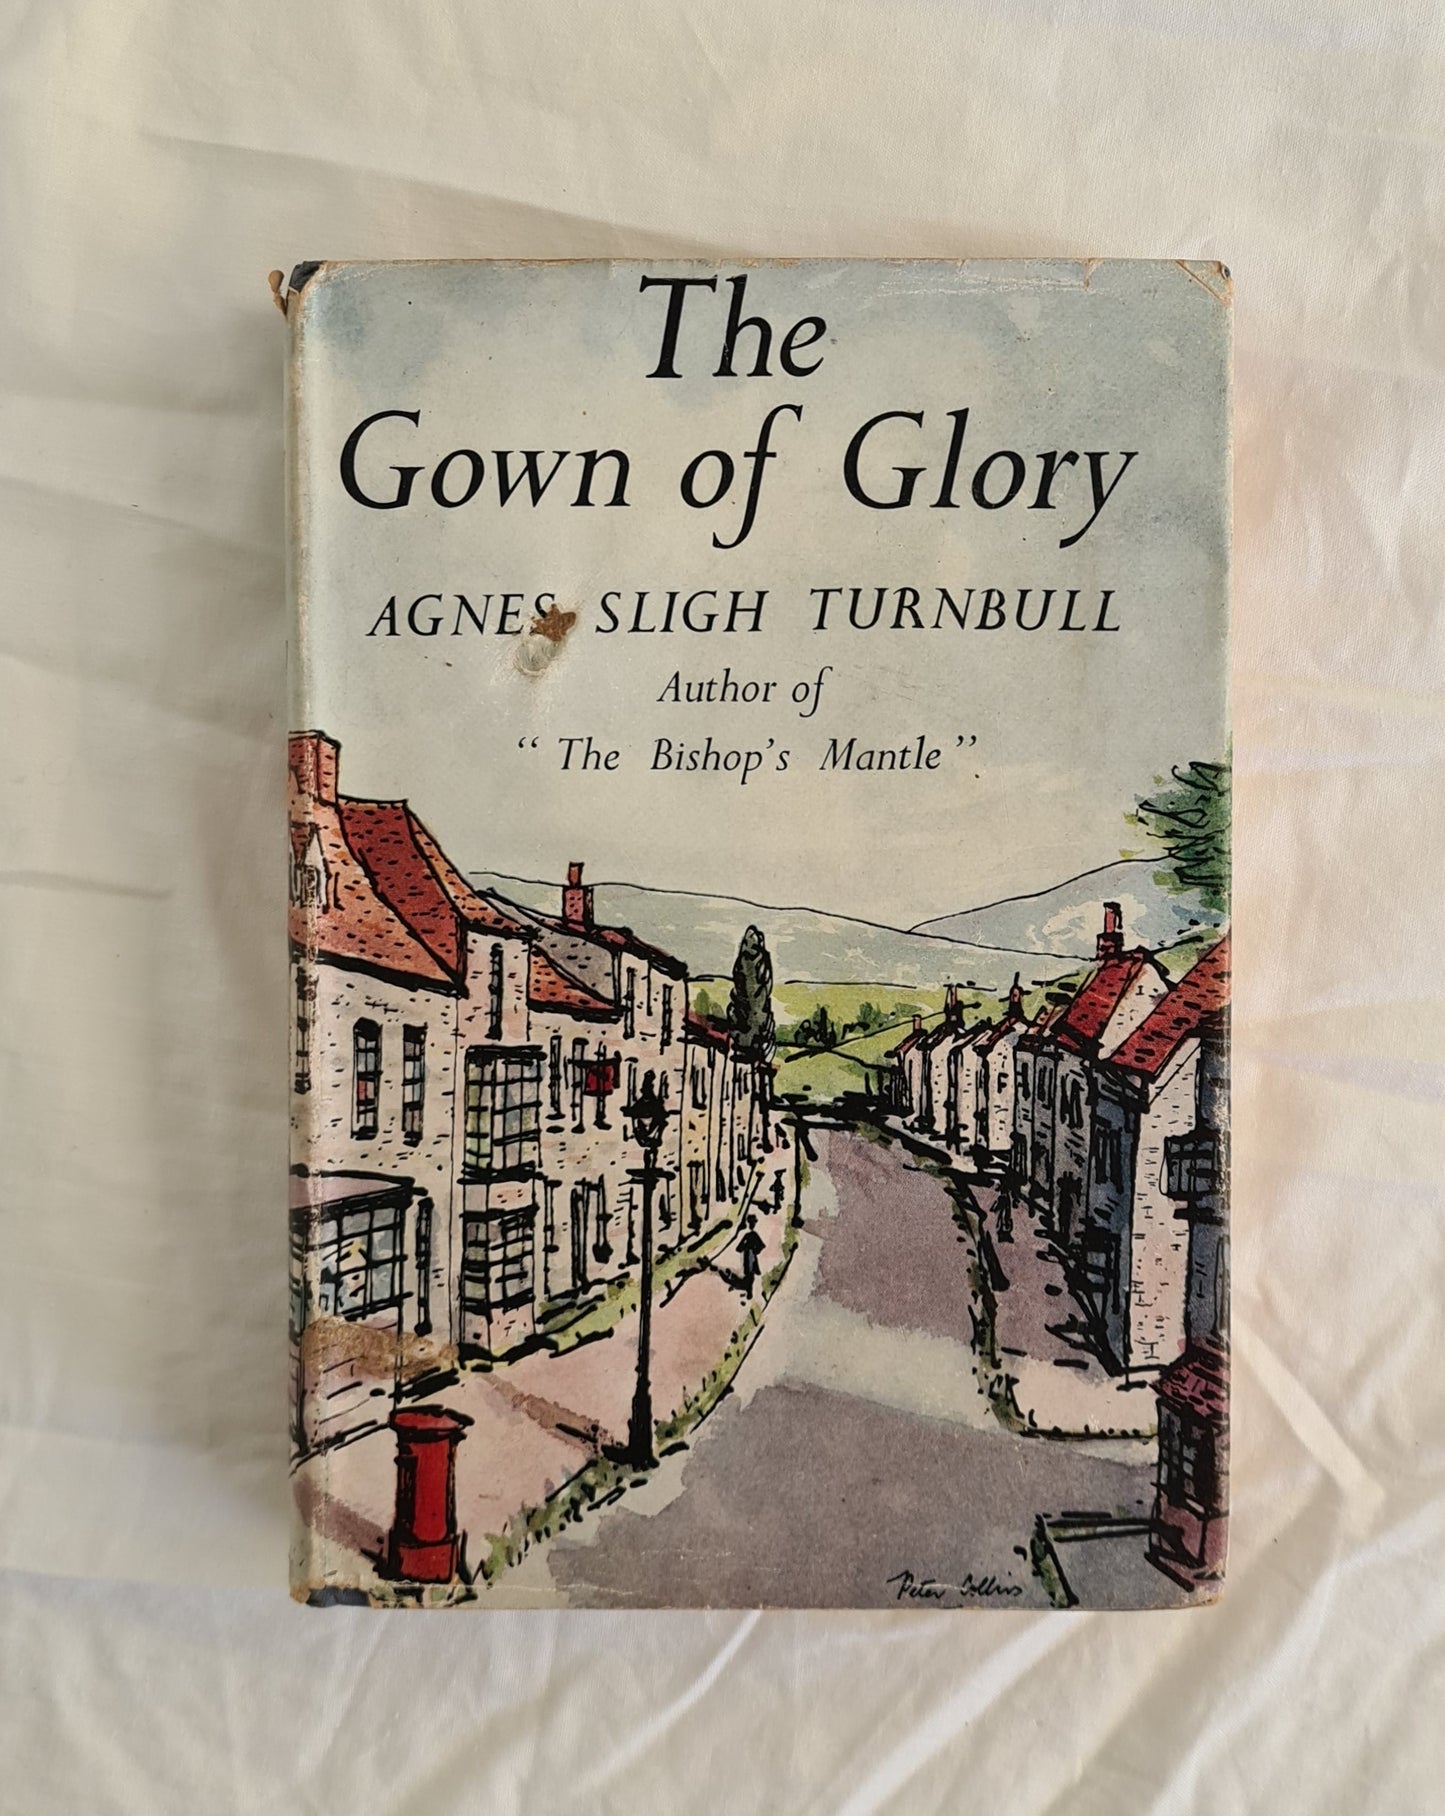 The Gown of Glory by Agnes Sligh Turnbull